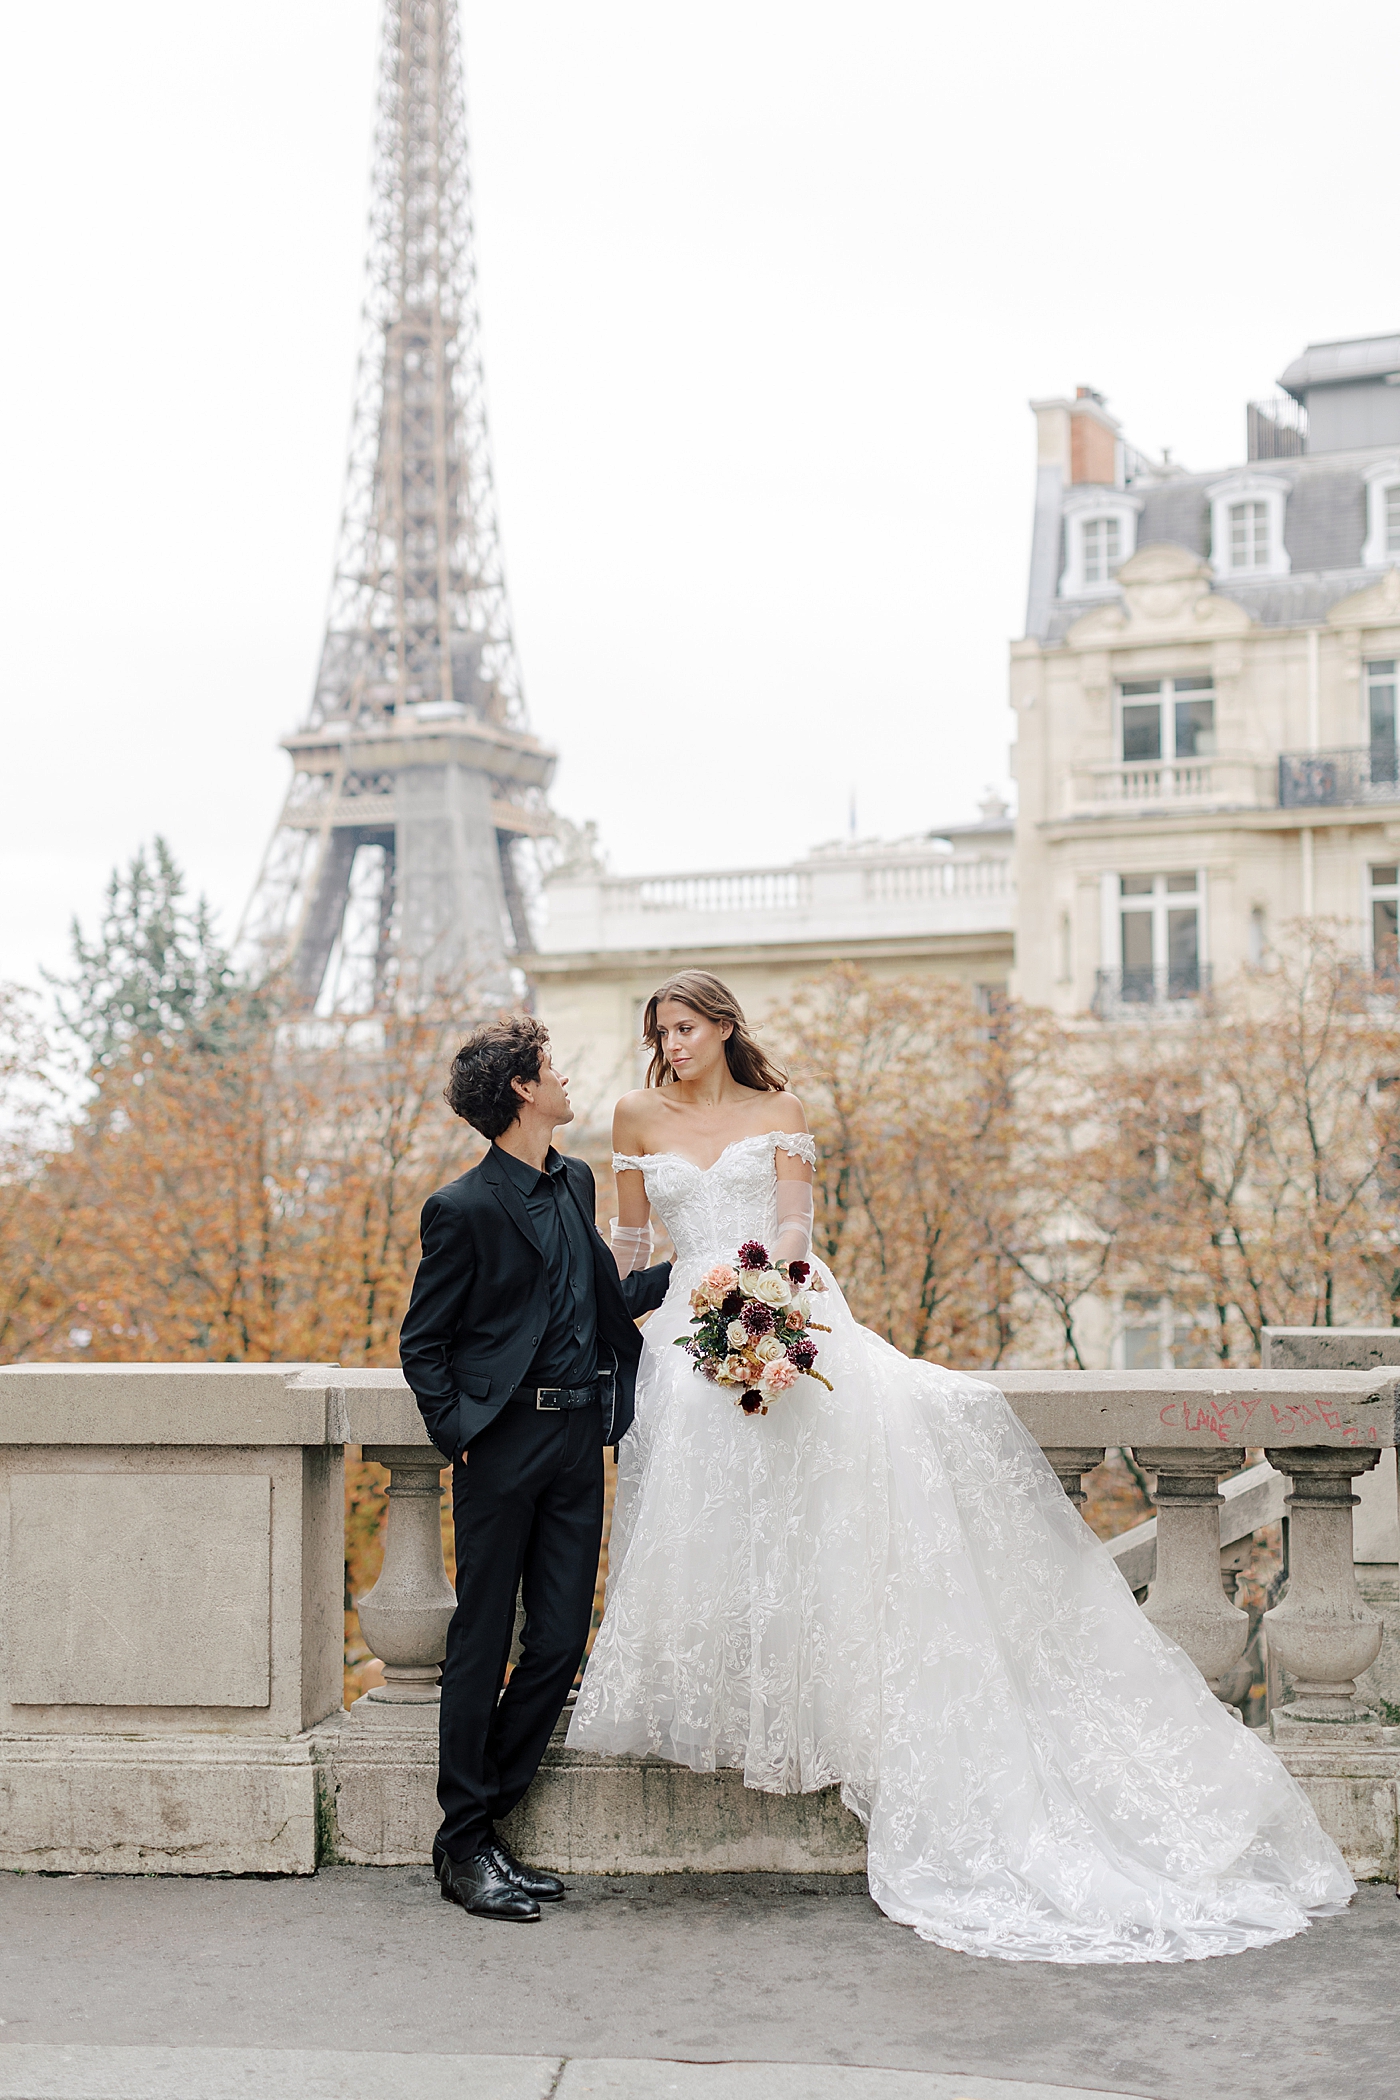 Image of a bride and groom standing closely and looking at each other in Paris with the Eiffel tower in the background | Image by Hope Helmuth Photography